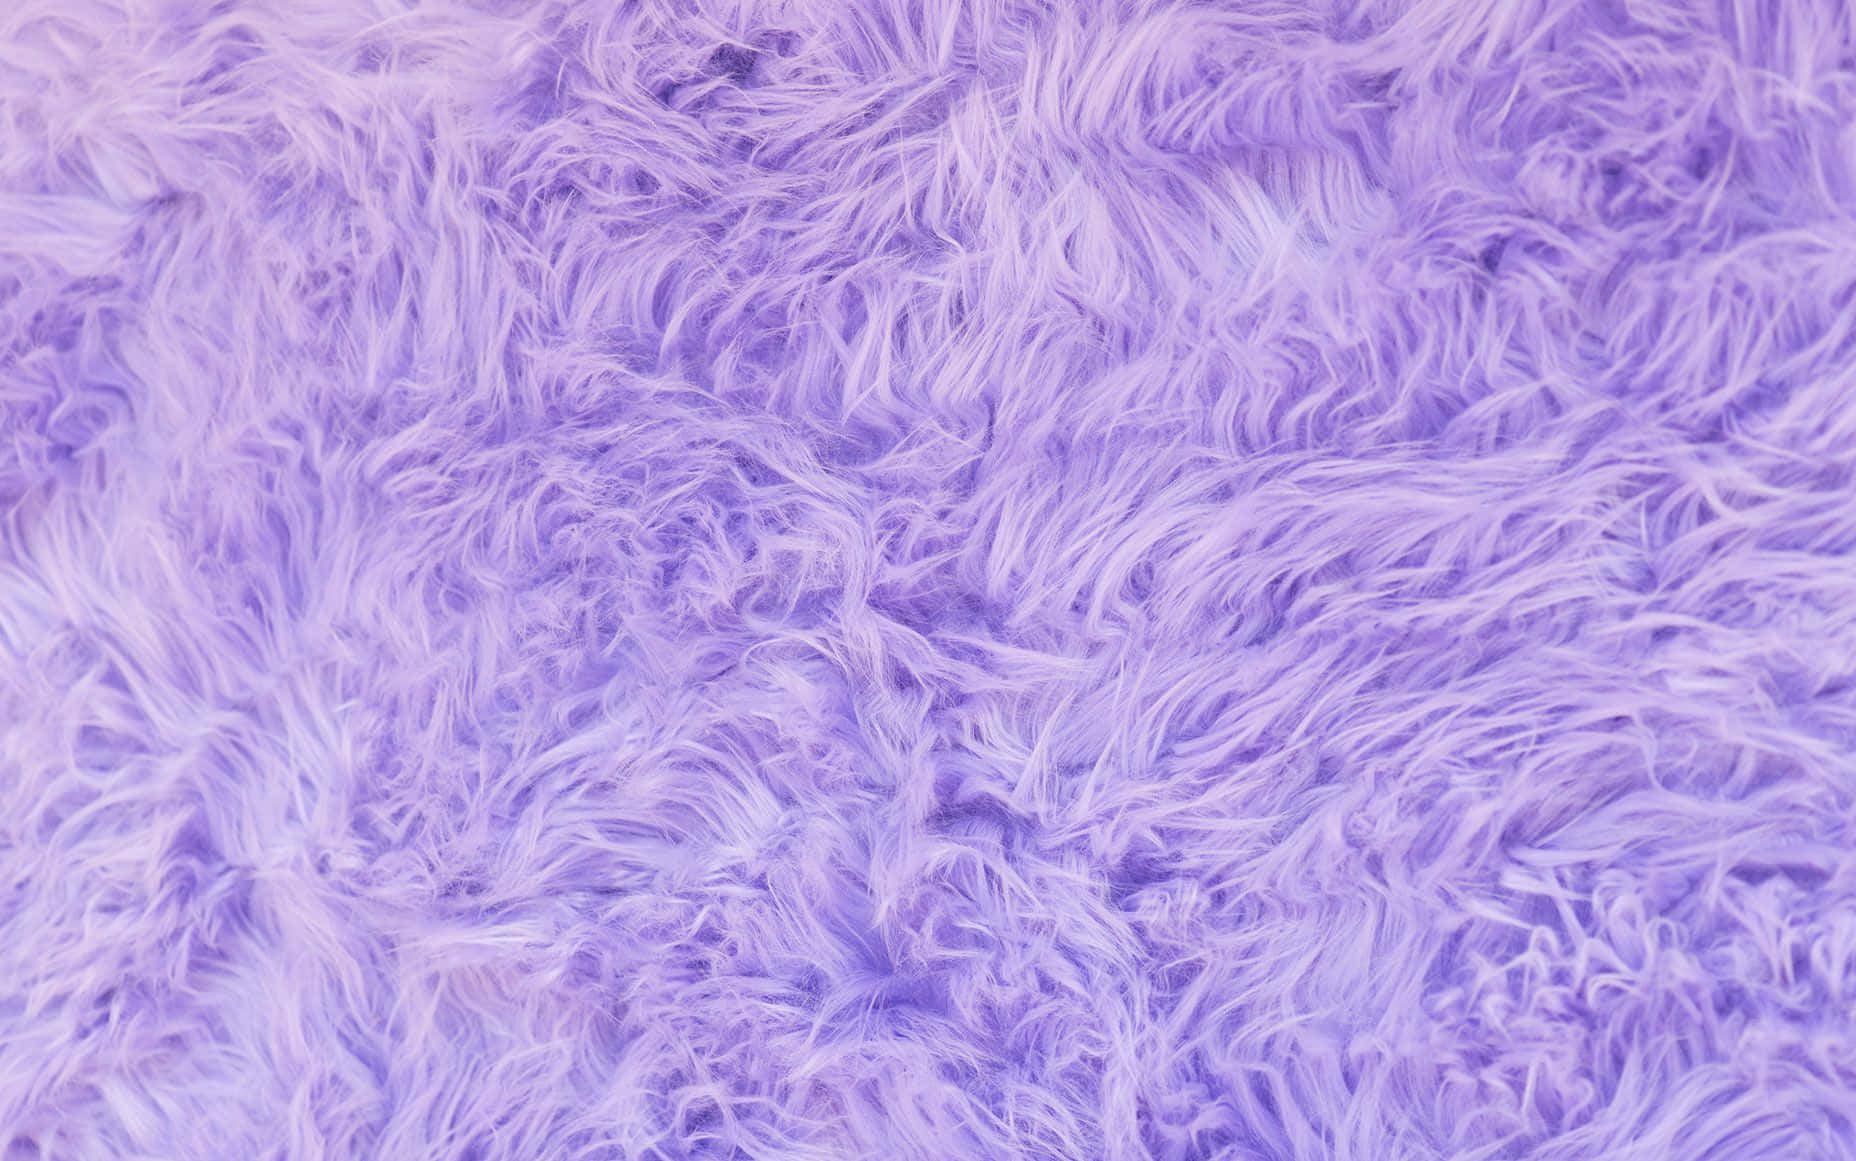 Purple Furry Background With A Close Up View